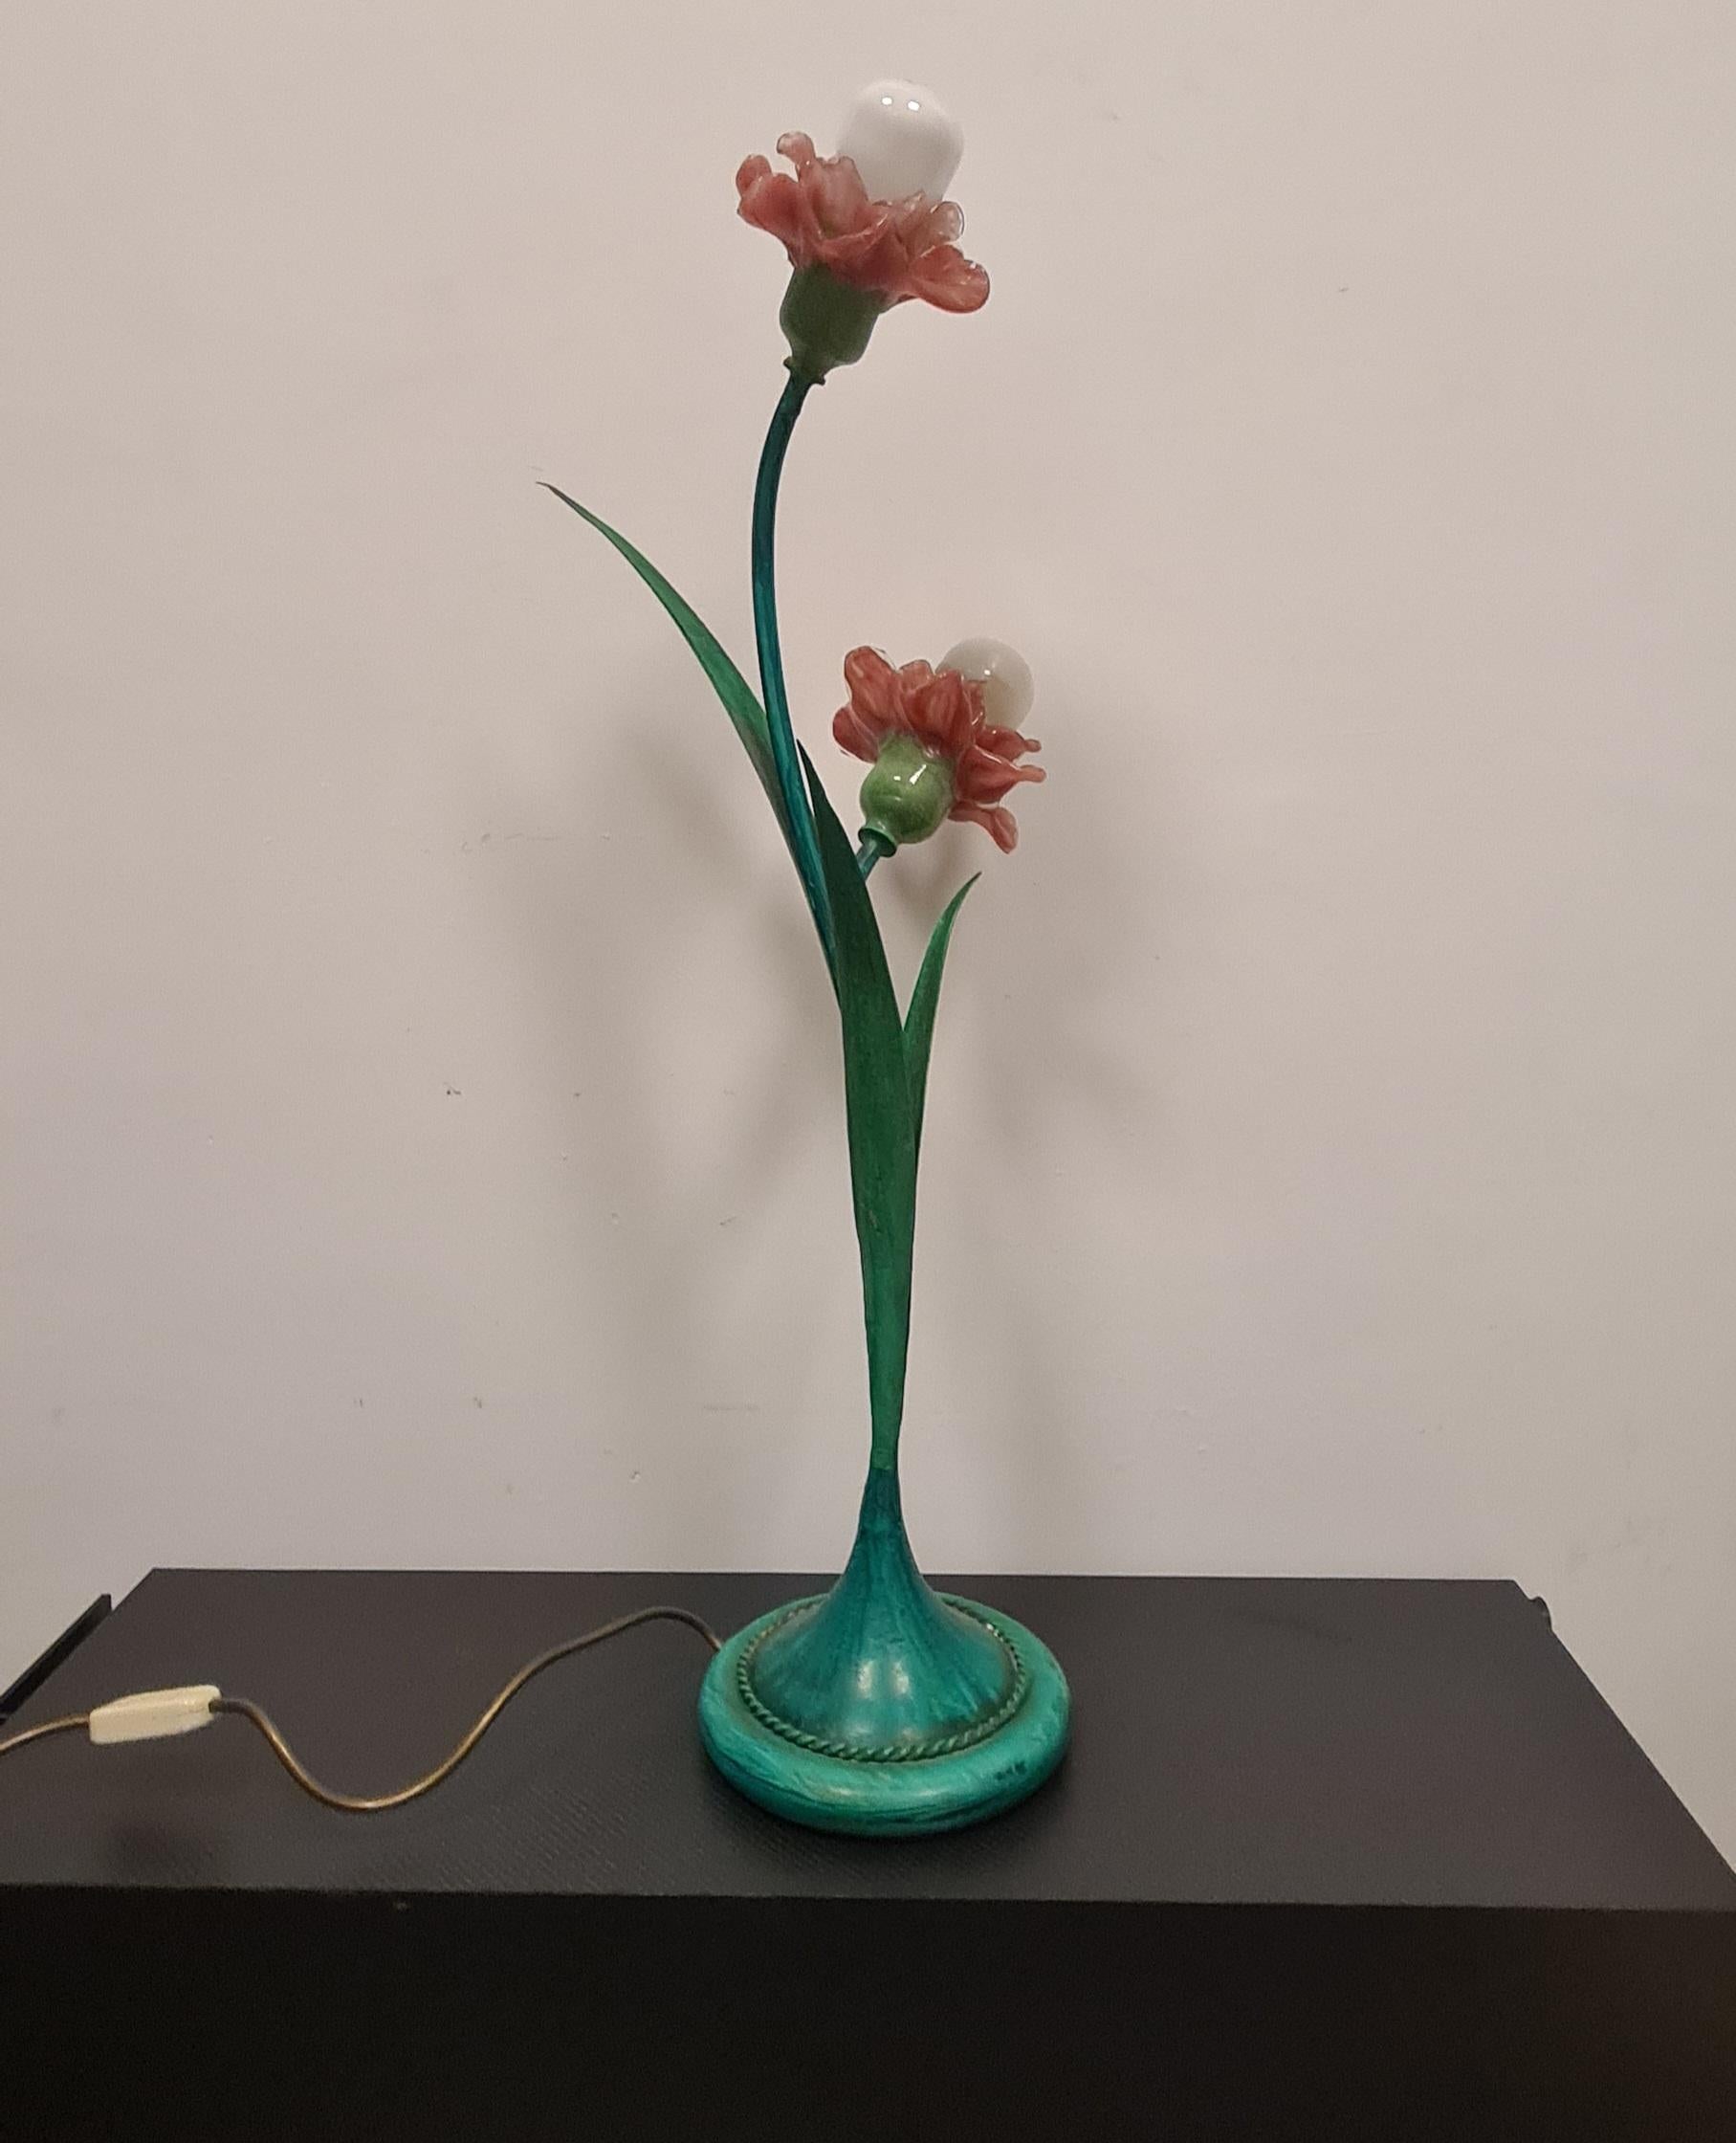 Set of lacquered wrought iron lamps and murano glass flower lampholders.

The set consists of a refined table lamp and a matching wall sconce.

The table lamp features a green lacquered wrought iron body and two pink murano glass flower-shaped lamp